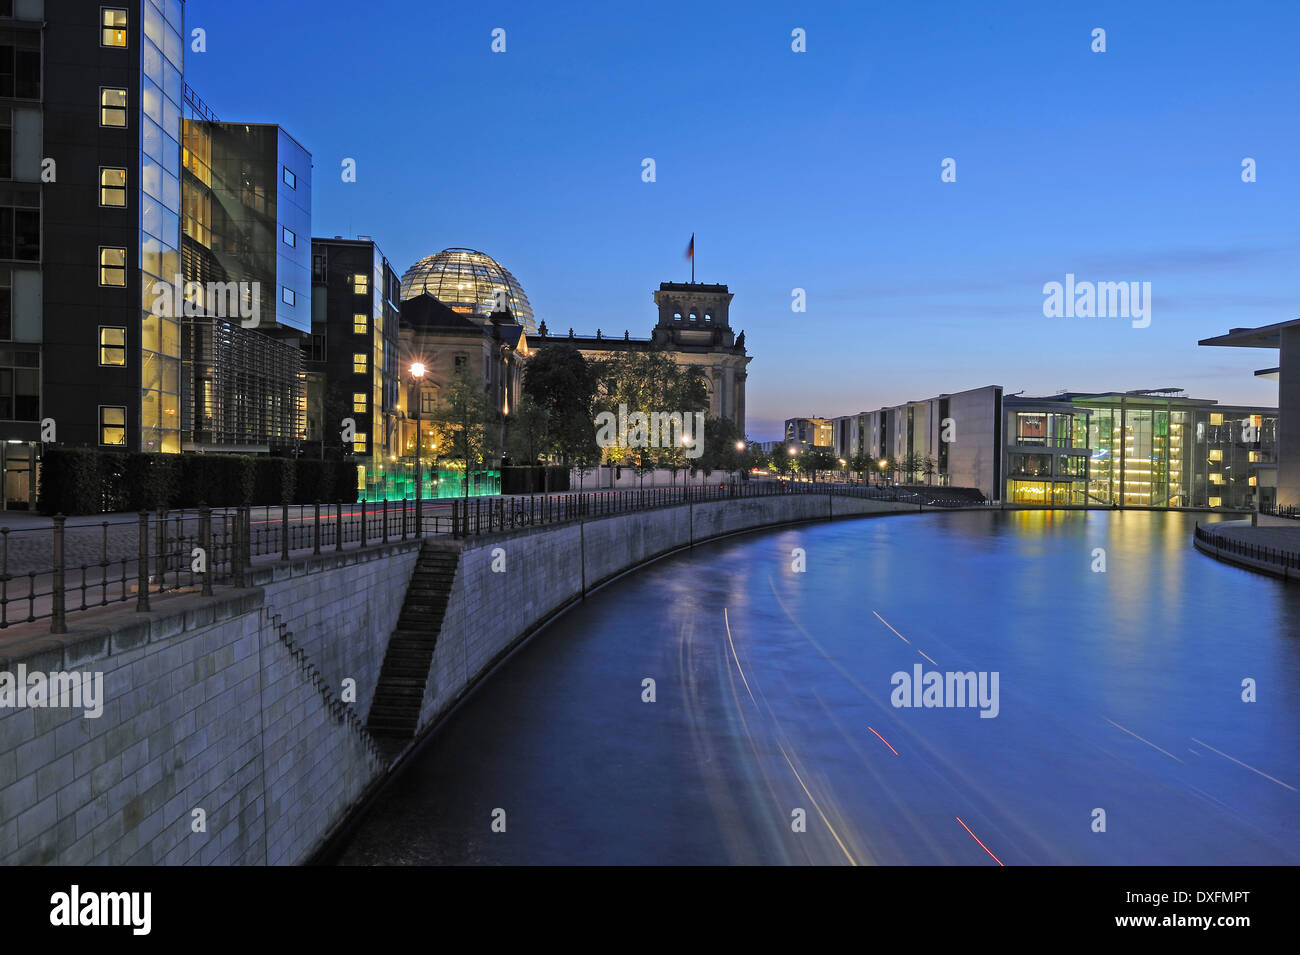 Spree River, government district with Reichstag building, Berlin, Germany Stock Photo